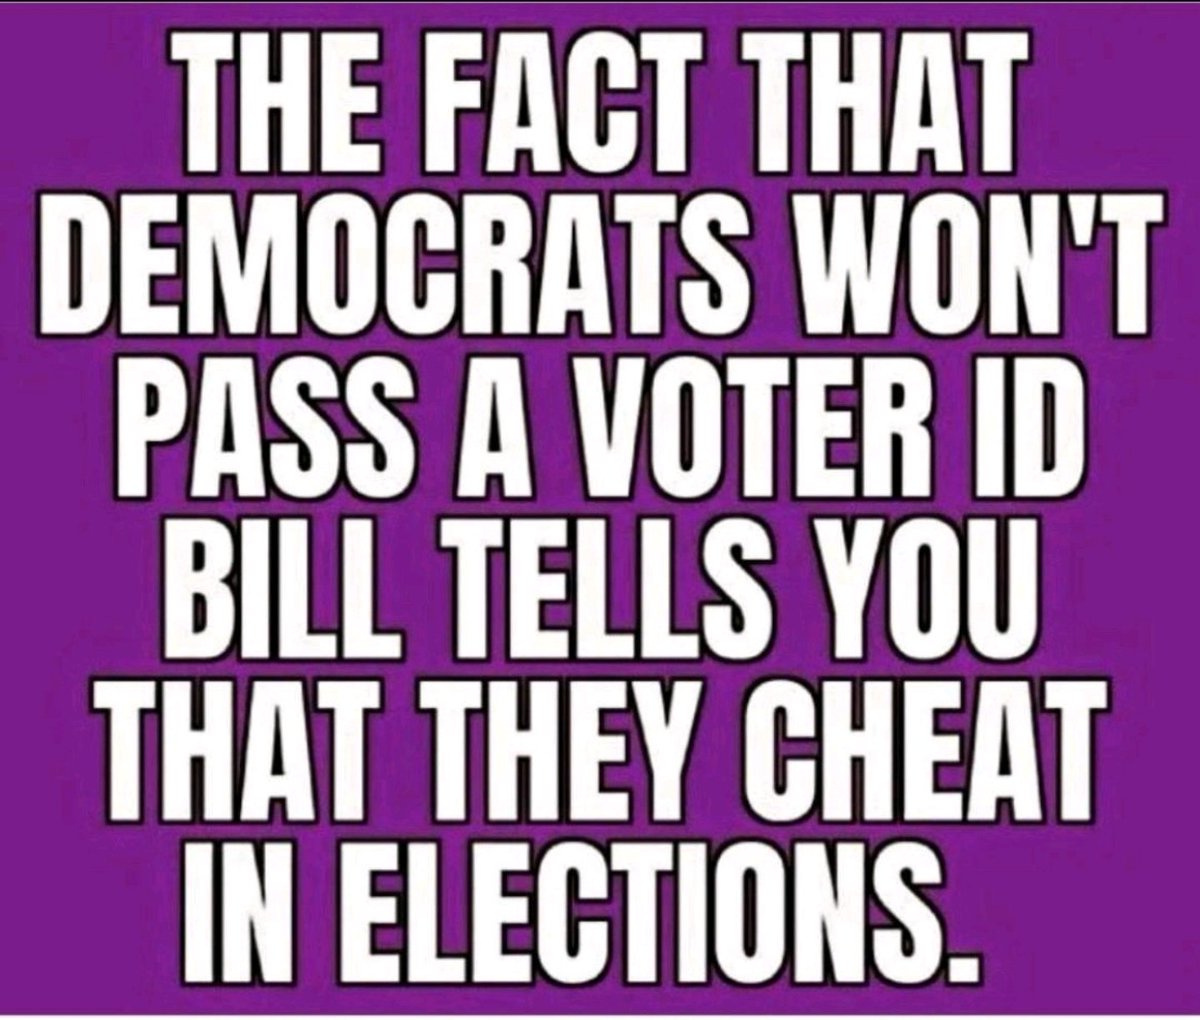 Who agrees with this statement It kind of points to election fraud doesn't it ?